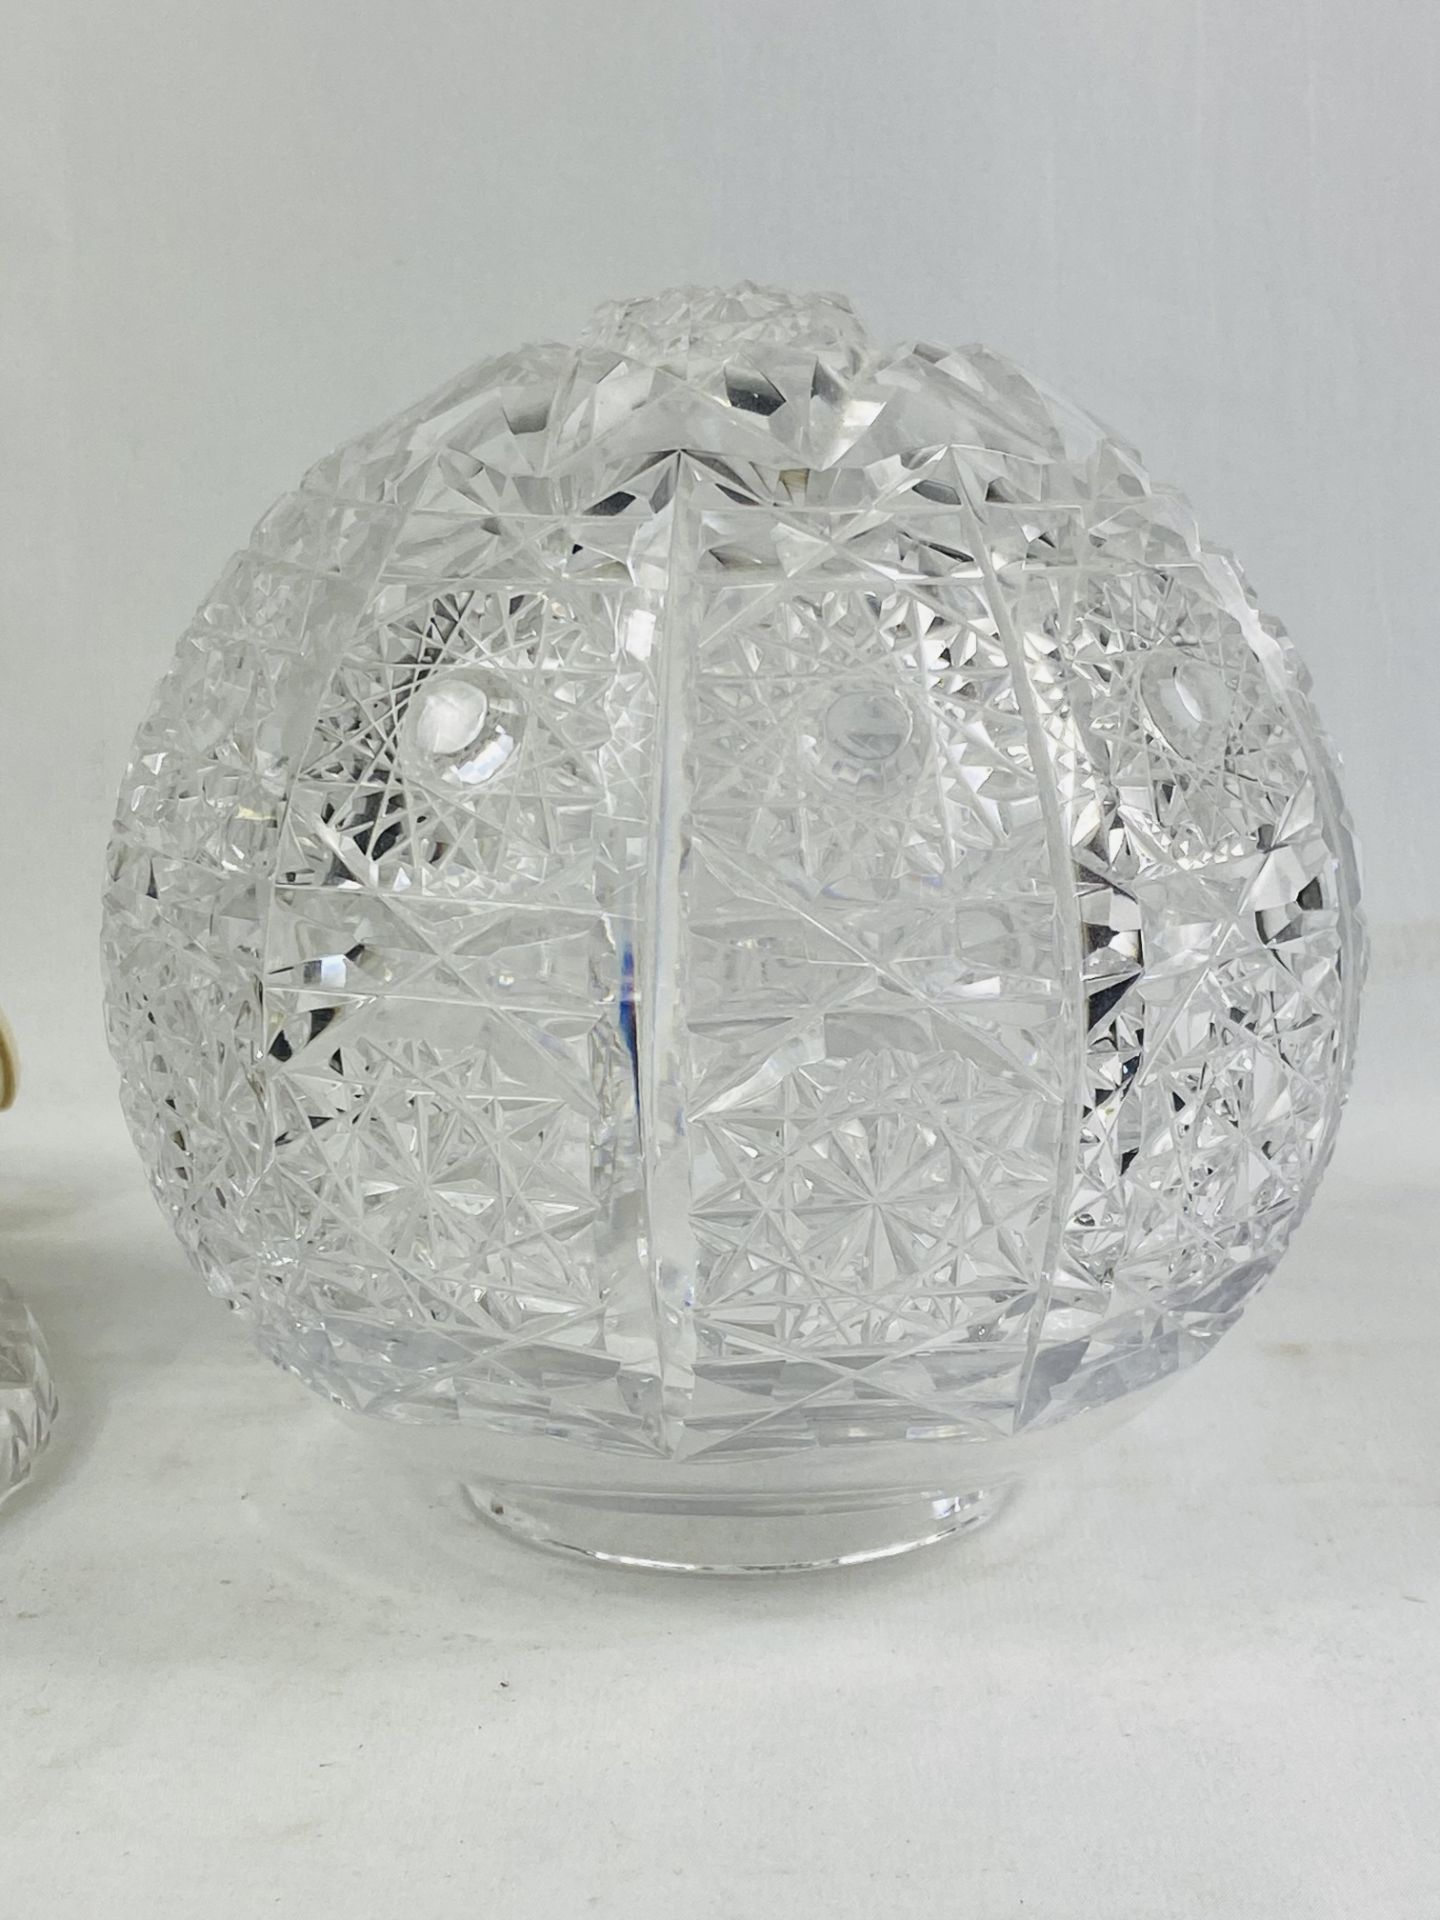 Cut glass table lamp - Image 3 of 5